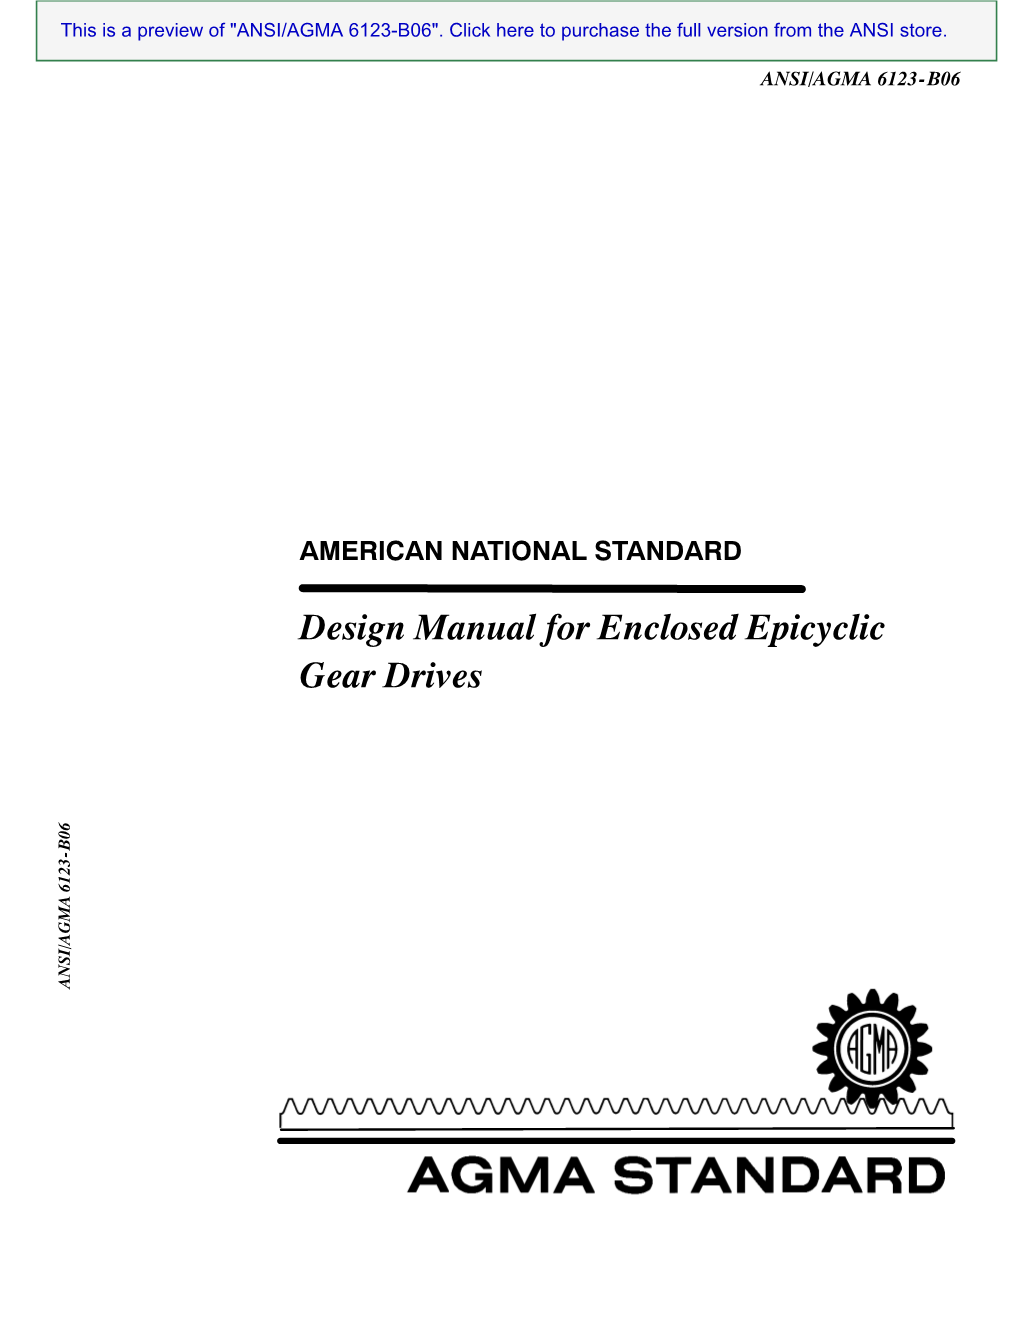 Design Manual for Enclosed Epicyclic Gear Drives